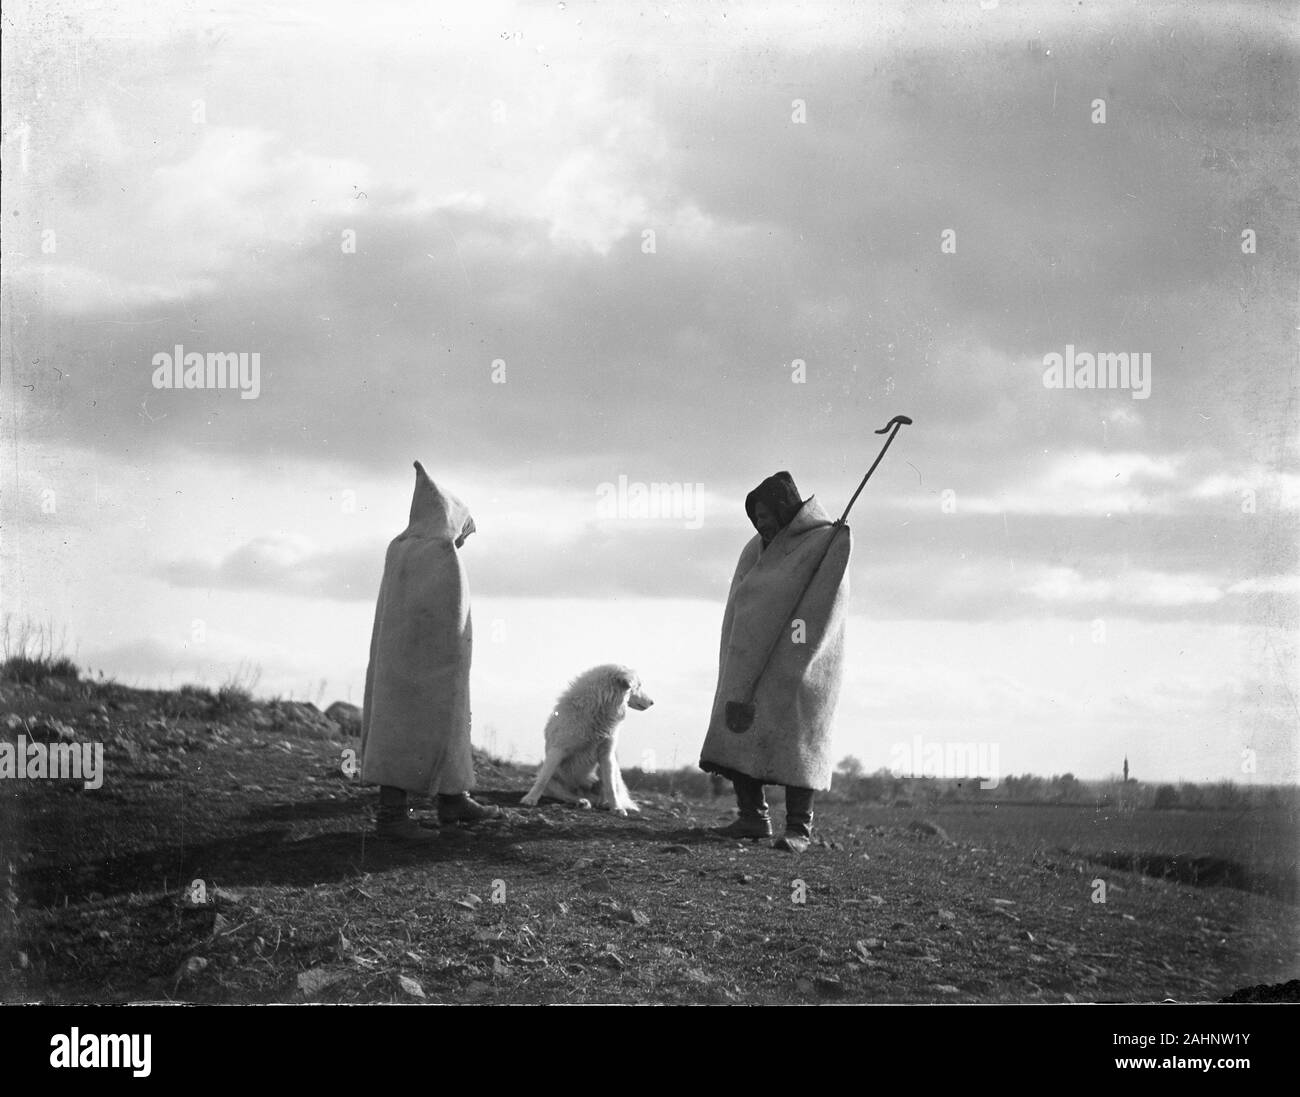 Two shepherds in traditional dress with their sheepdog in Ottoman Turkey near mediteranian sea. Atmospheric picture taken in evening sun with cloudy sky. Minaret in the background. Photograph dated around 1910-1920. Copy from a dry glass plate, originating from the Herry W. Schaefer collection. Stock Photo